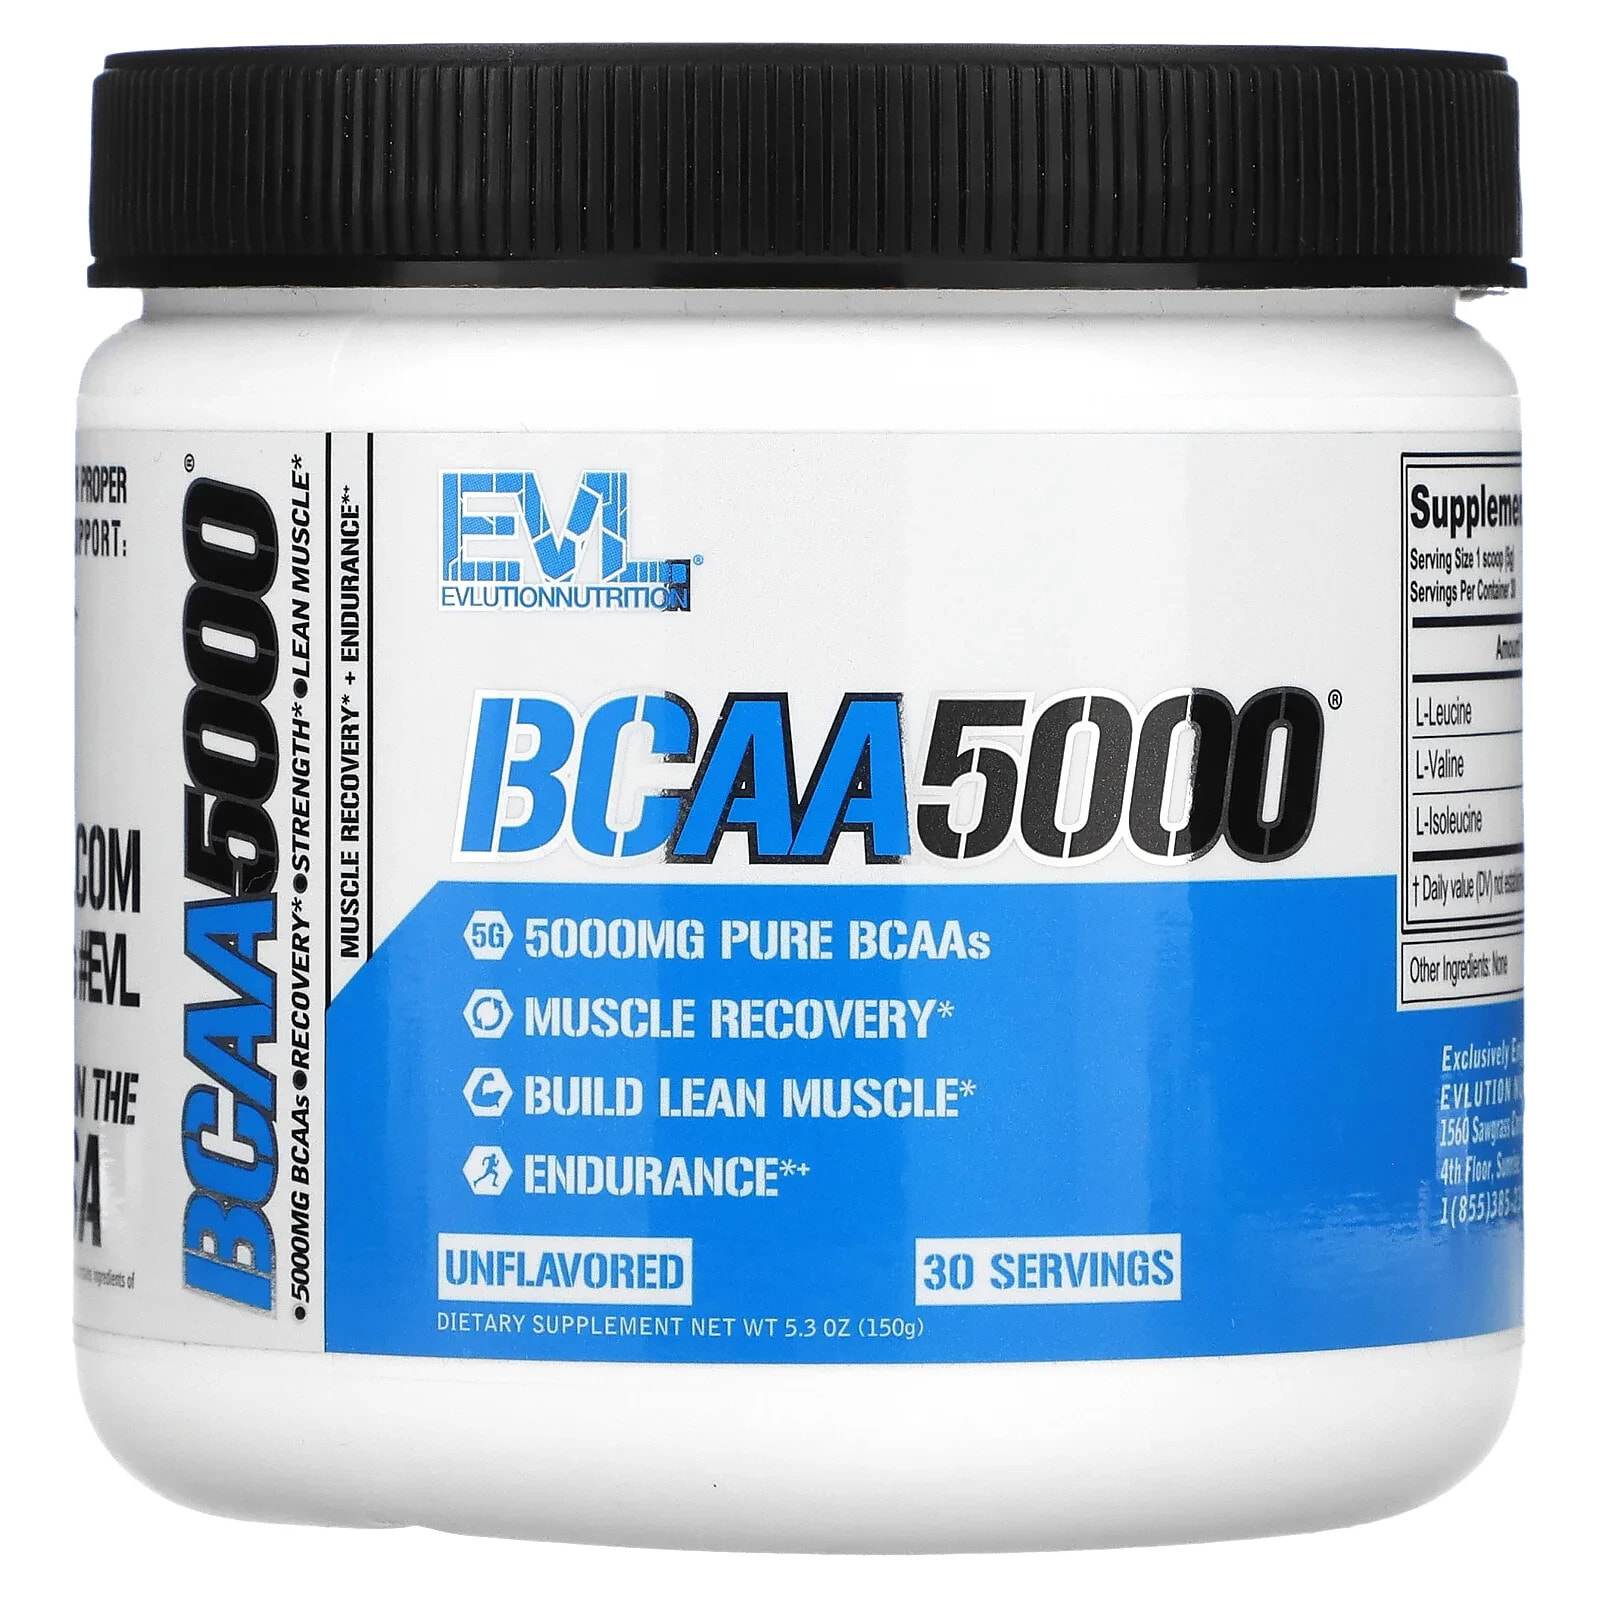 BCAA5000, Unflavored, 10.58 oz (300 g)